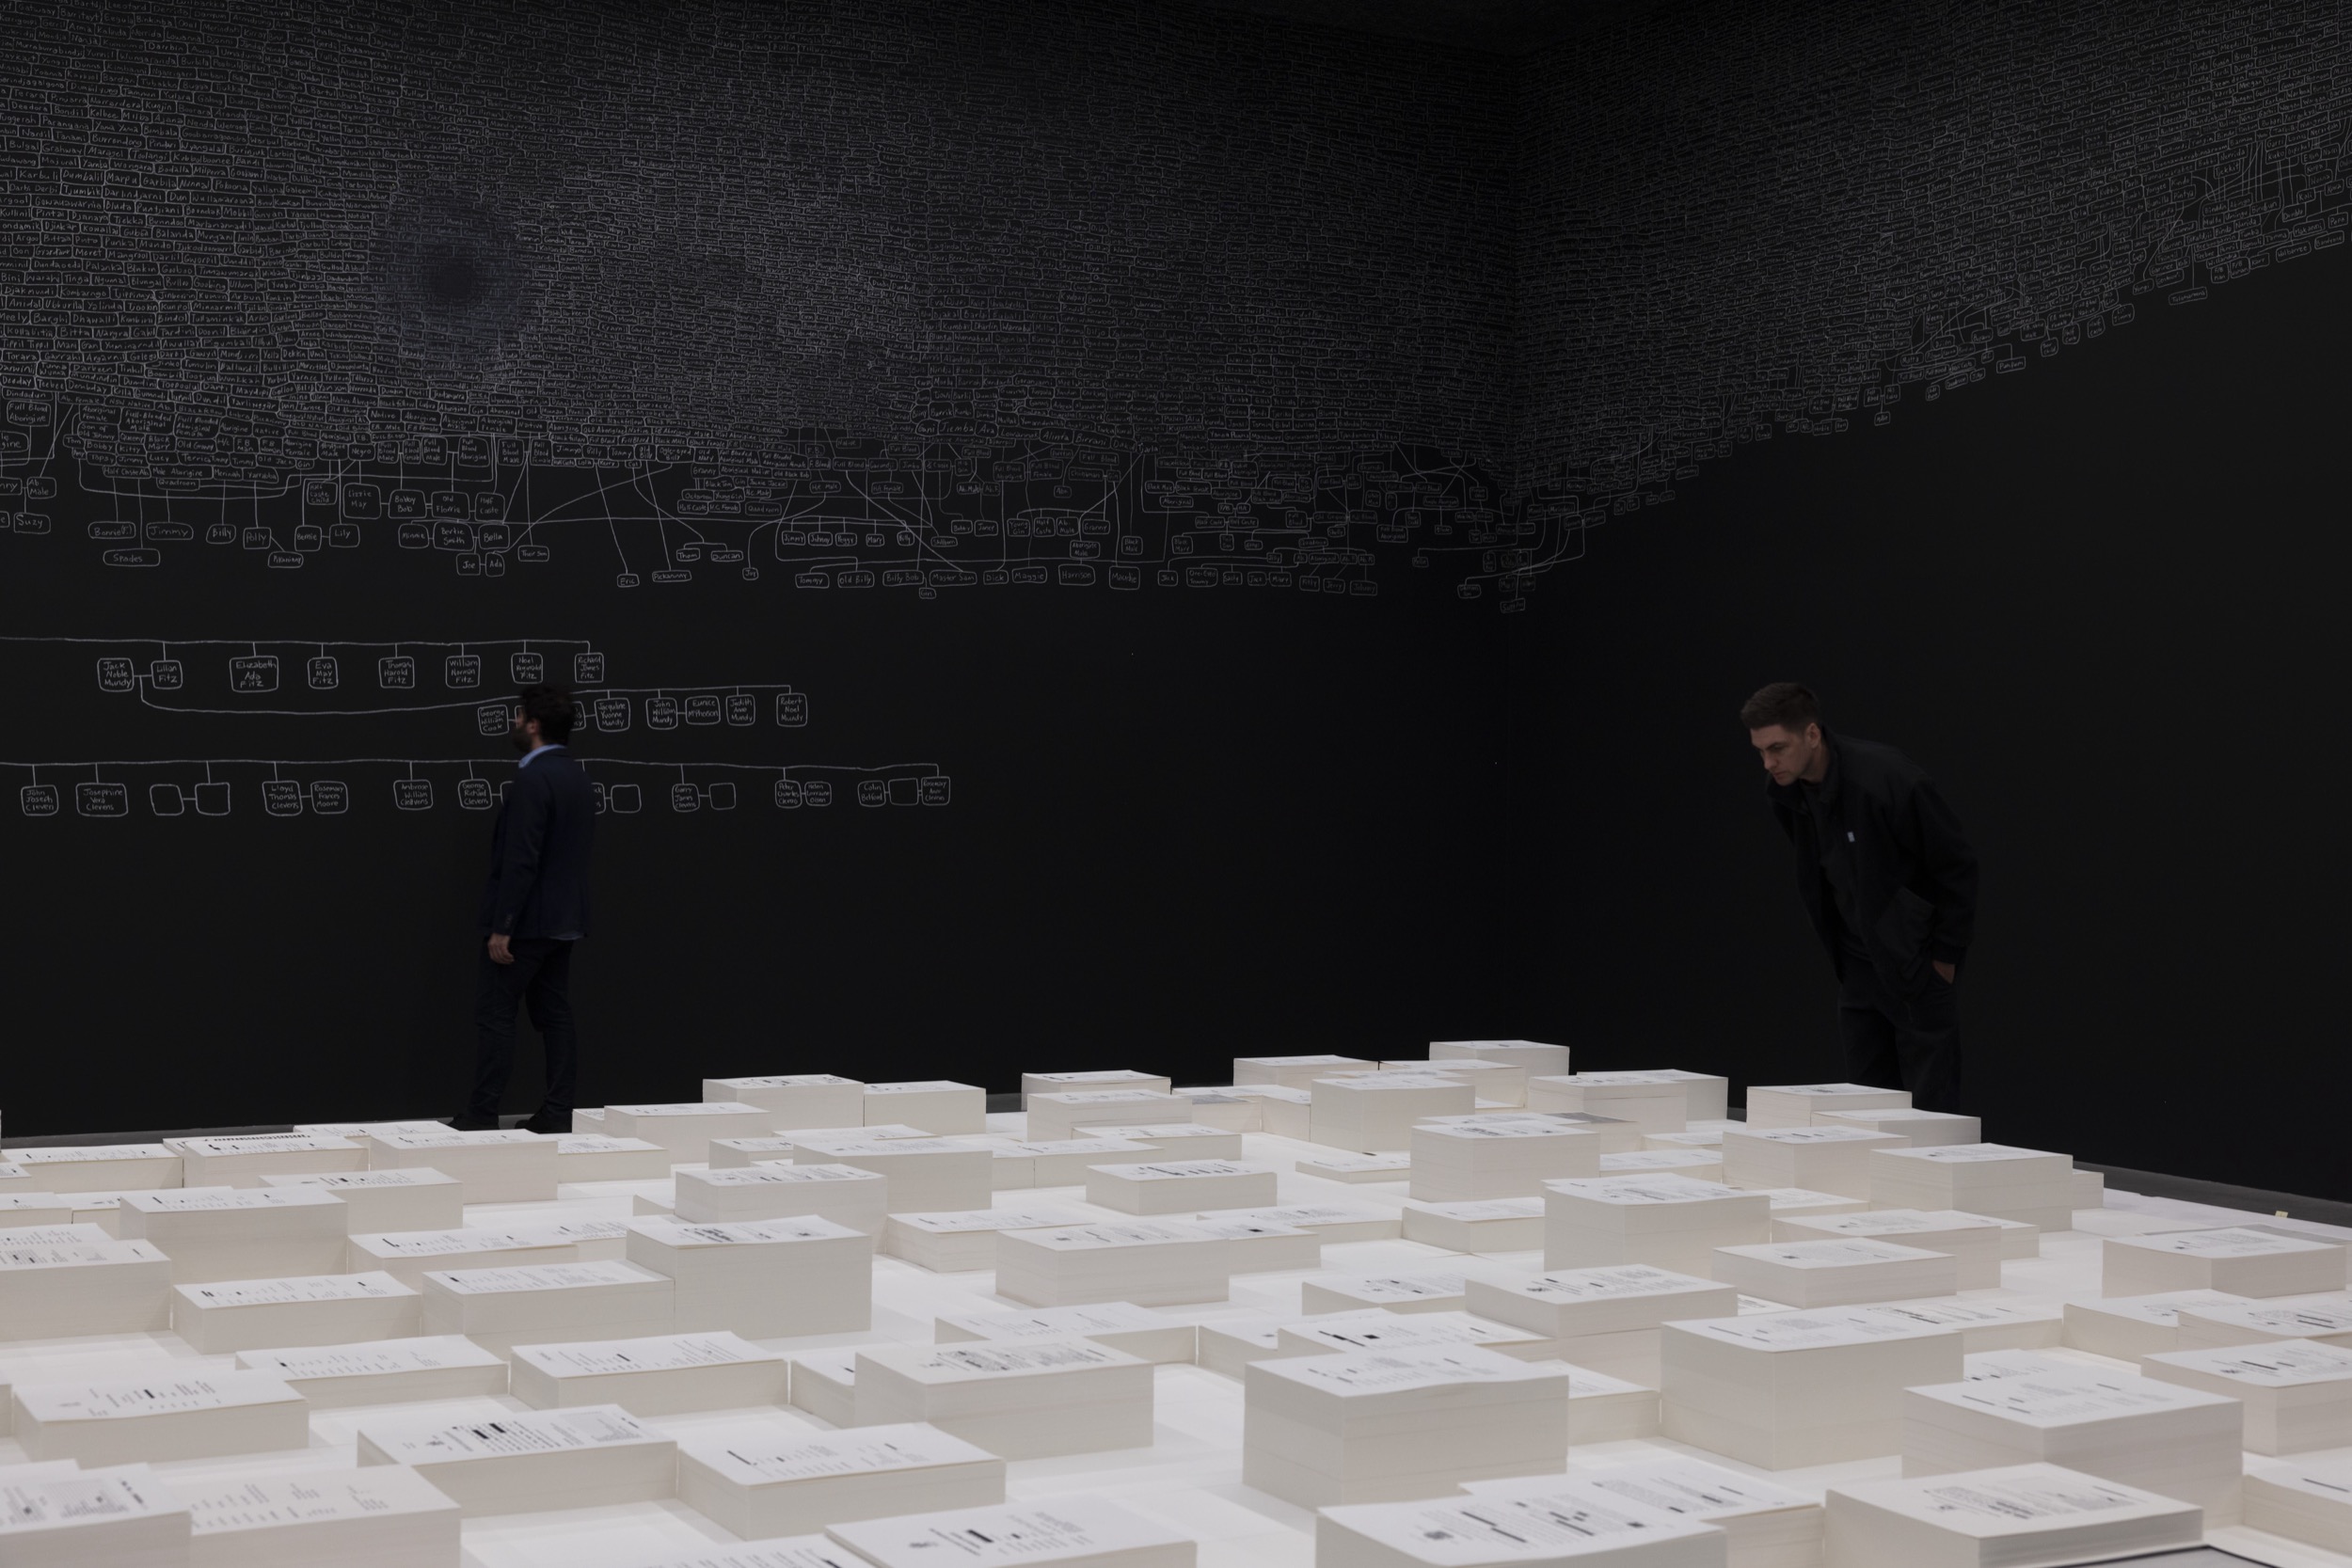 <p>Archie Moore, <em>kith and kin</em> 2024. Curated by Ellie Buttrose. Australia Pavilion at Venice Biennale 2024. Project team: Adrian Collette am, Diego Carpentiero, Gillian Mercer, Mikala Tai, Niwa Mburuja, Tahjee Moar, Tahmina Maskinyar, with the support from the wider Creative Australia team. Photographer: Andrea Rossetti, © the artist. Image courtesy of the artist and The Commercial.</p>